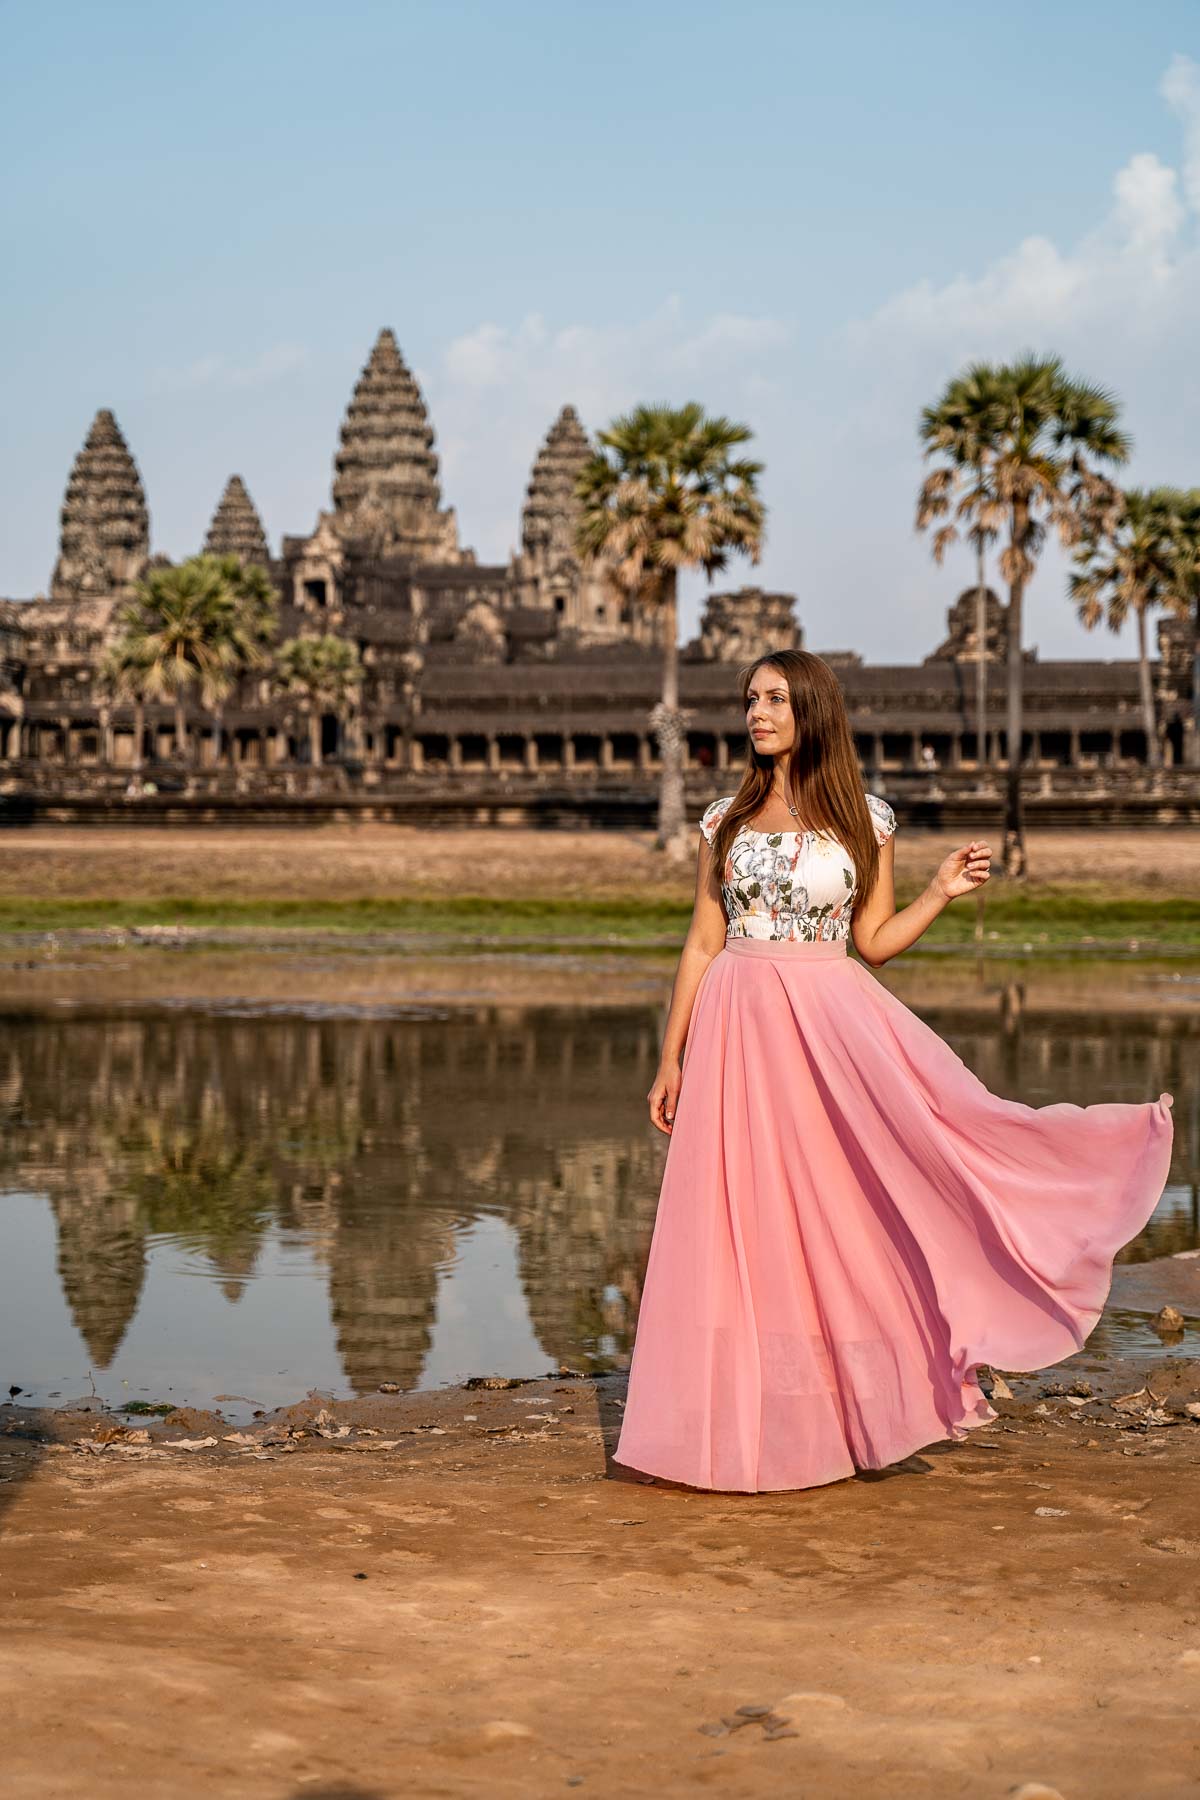 Girl in a pink skirt standing in front of the Angkor Wat in Cambodia